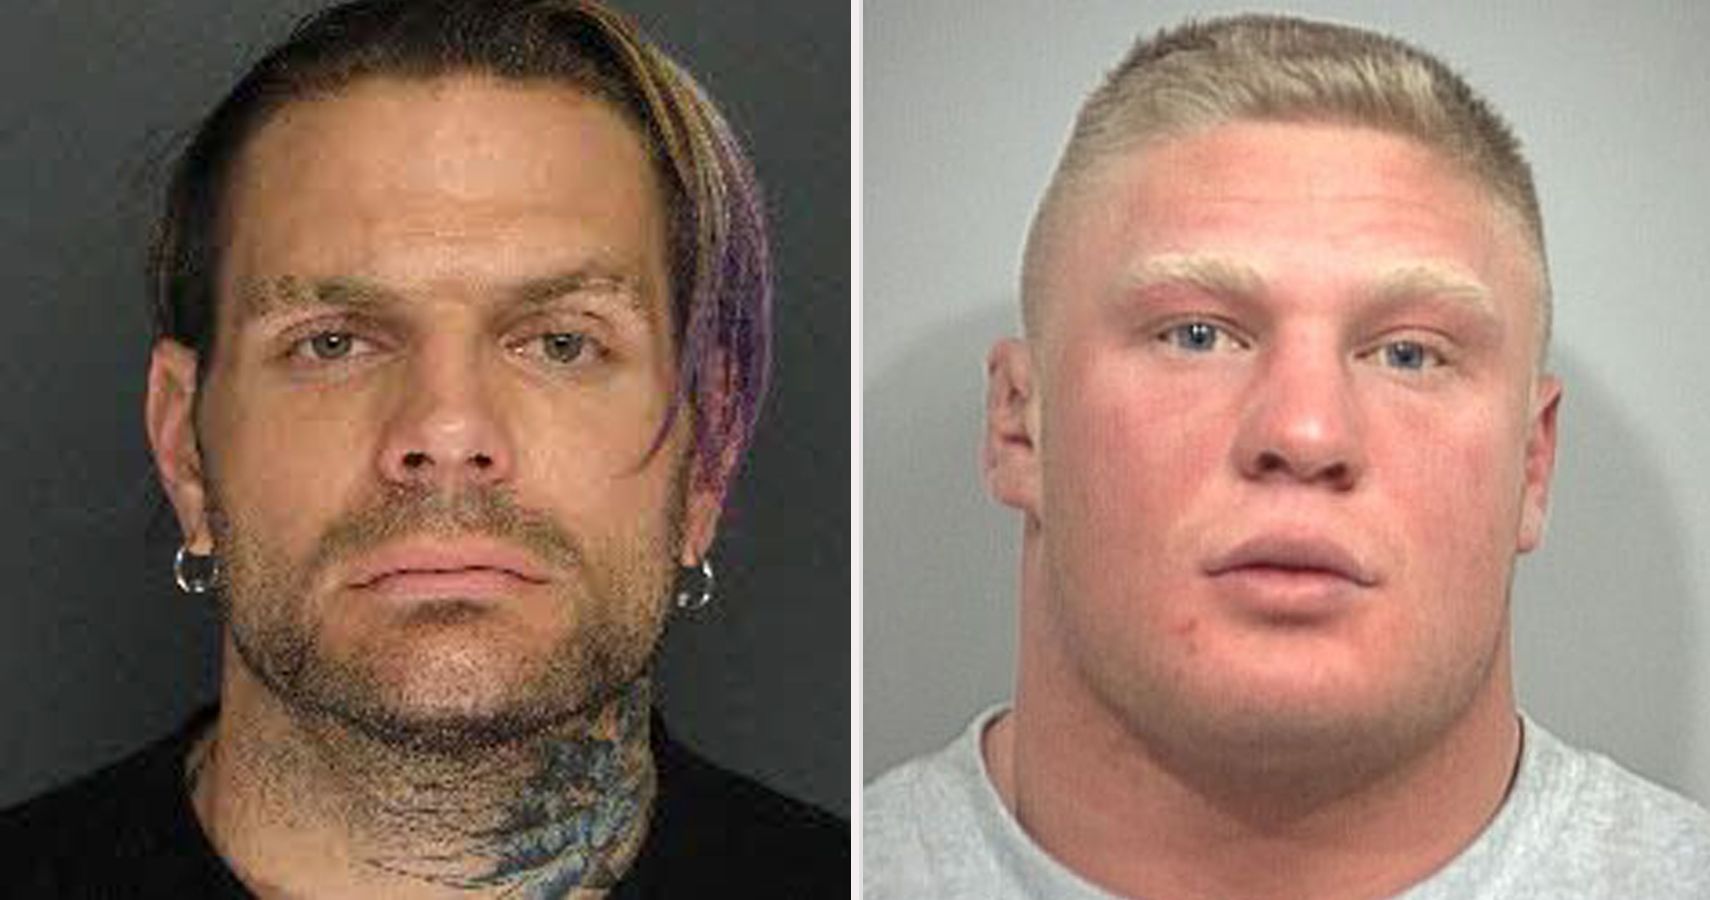 That's why WWE wants these mug shots to go away forever. 